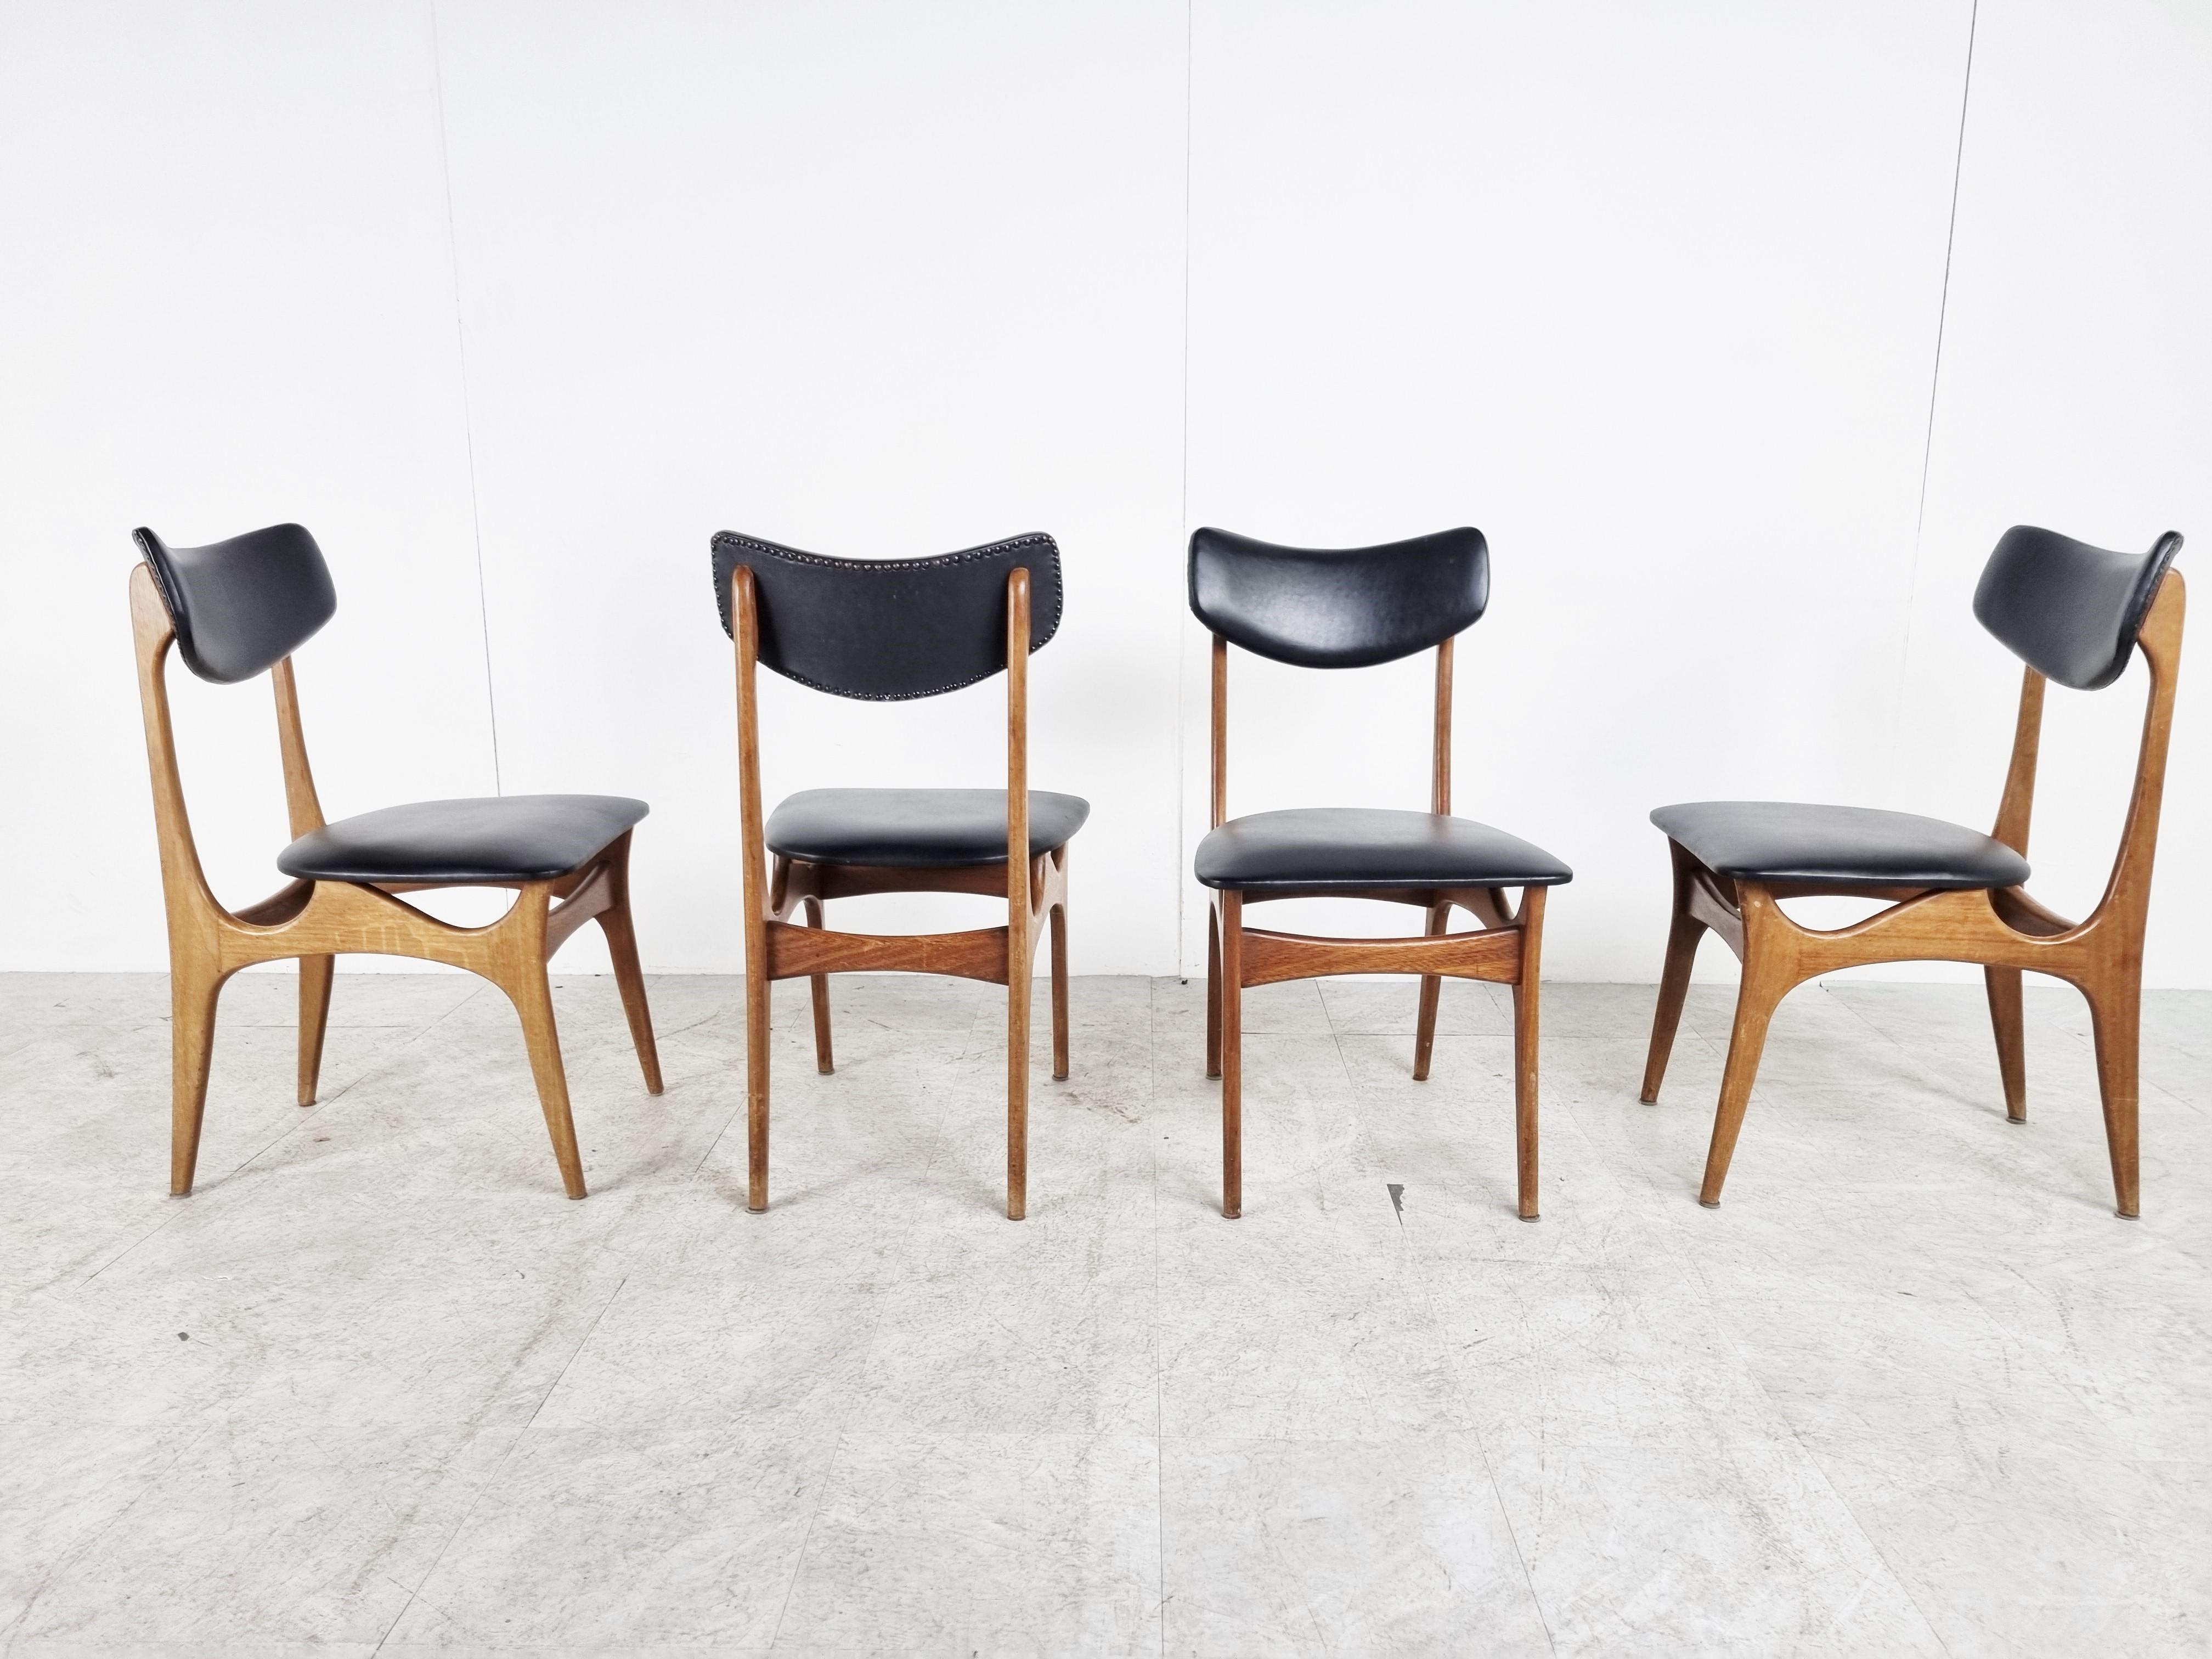 Faux Leather Set of 4 Vintage Dining Chairs by Louis Van Teeffelen, 1960s For Sale